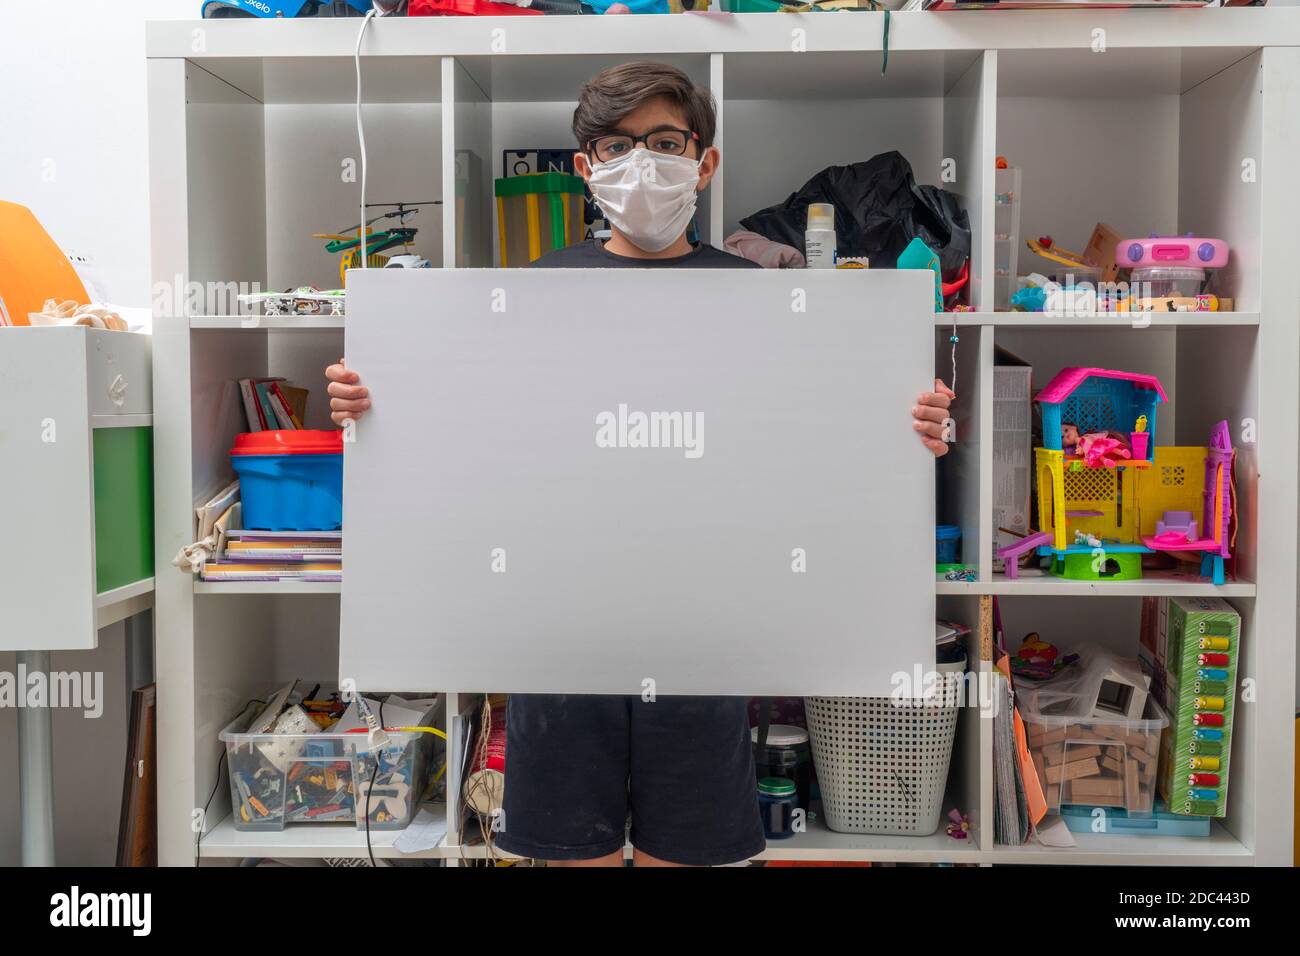 Covid-19 Stay at home concept: A little boy with glasses wears a face mask and holds a white empty board without a message. The kid stands Stock Photo